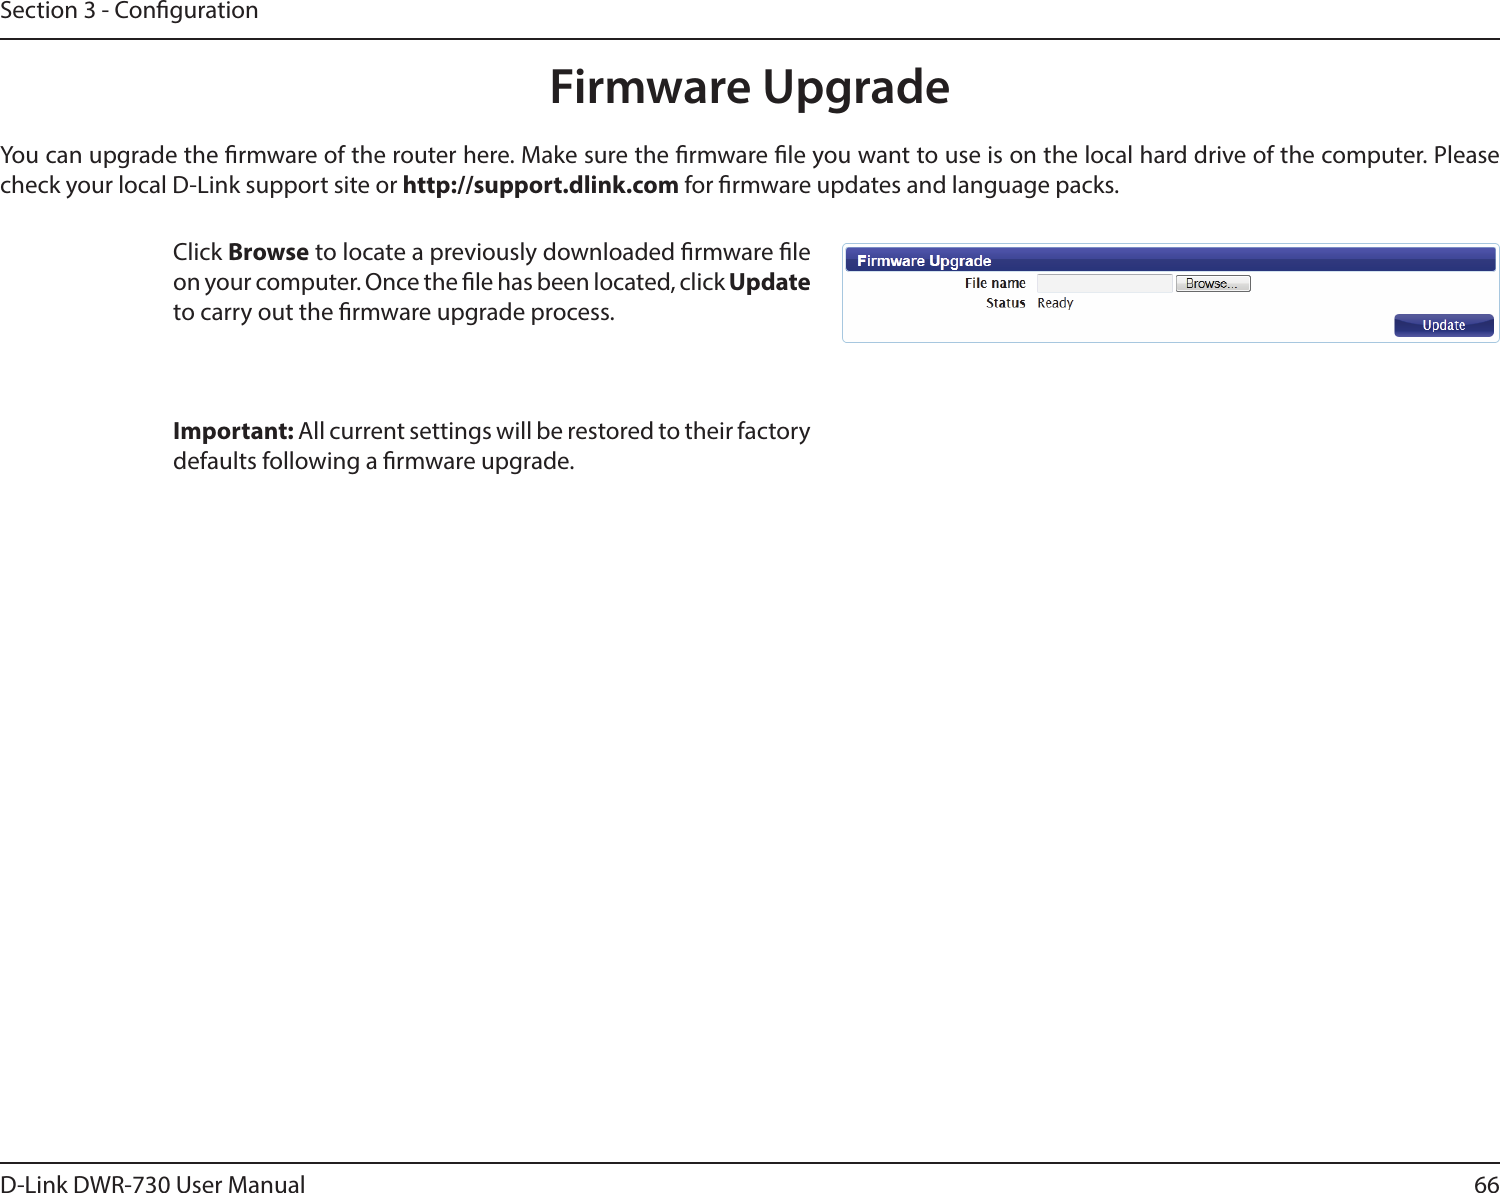 66D-Link DWR-730 User ManualSection 3 - CongurationFirmware UpgradeClick Browse to locate a previously downloaded rmware le on your computer. Once the le has been located, click Update to carry out the rmware upgrade process.Important: All current settings will be restored to their factory defaults following a rmware upgrade. You can upgrade the rmware of the router here. Make sure the rmware le you want to use is on the local hard drive of the computer. Please check your local D-Link support site or http://support.dlink.com for rmware updates and language packs.